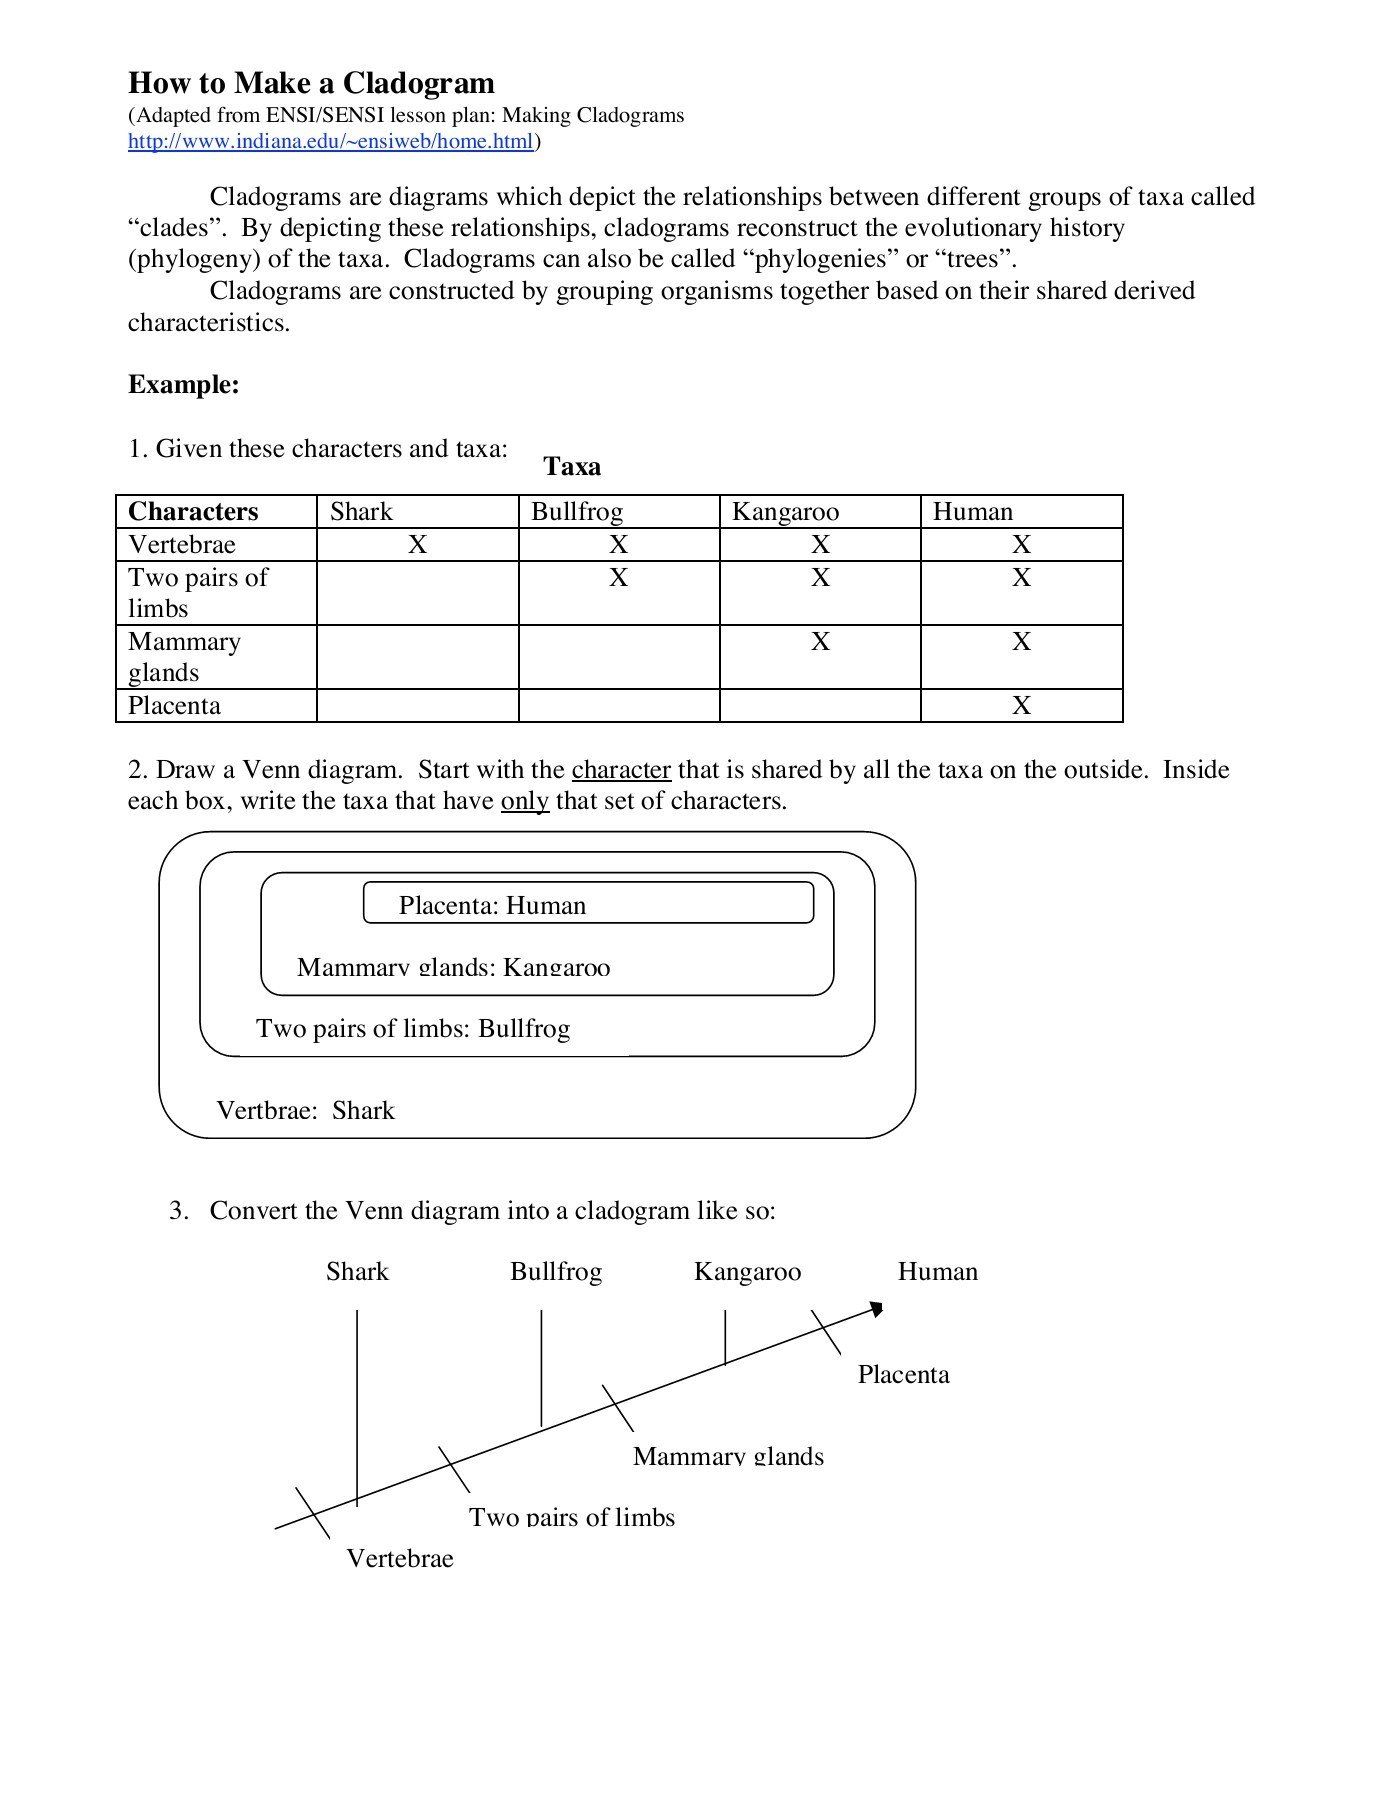 How To Make A Cladogram  Boston University  Fliphtml5 As Well As Cladogram Worksheet Answers